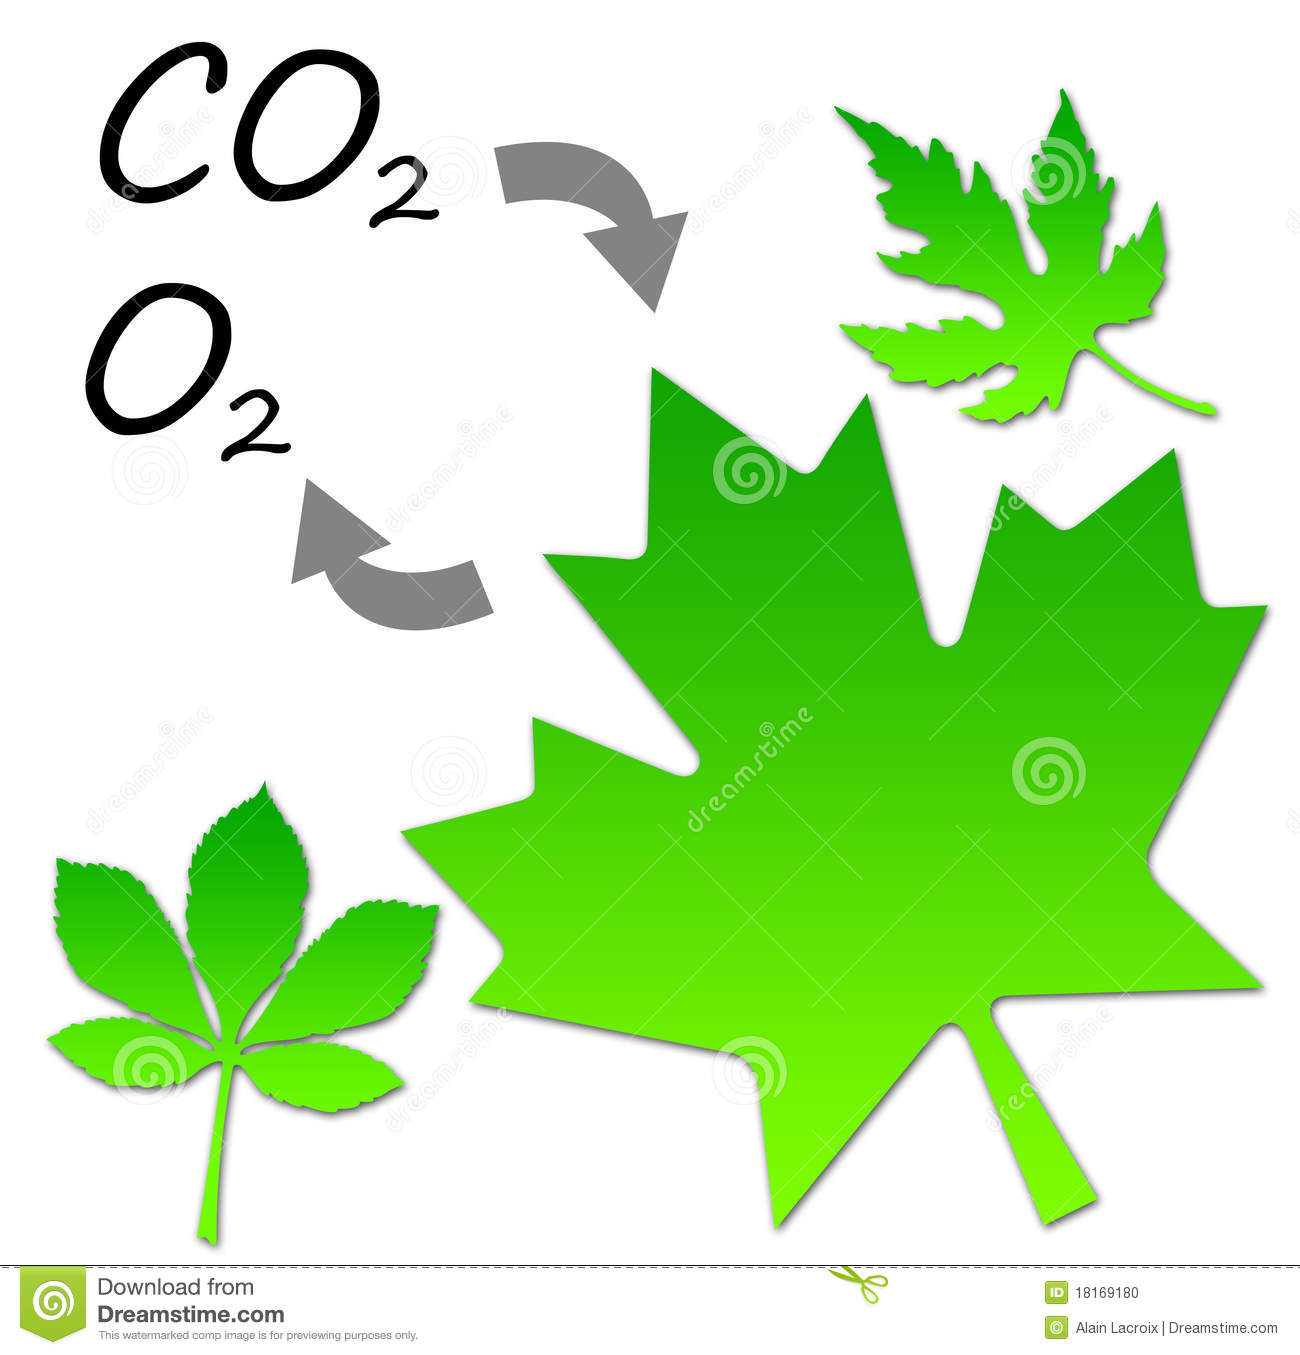 Forming Oxygen And Absorbing Carbon Dioxide Through Photosynthesis